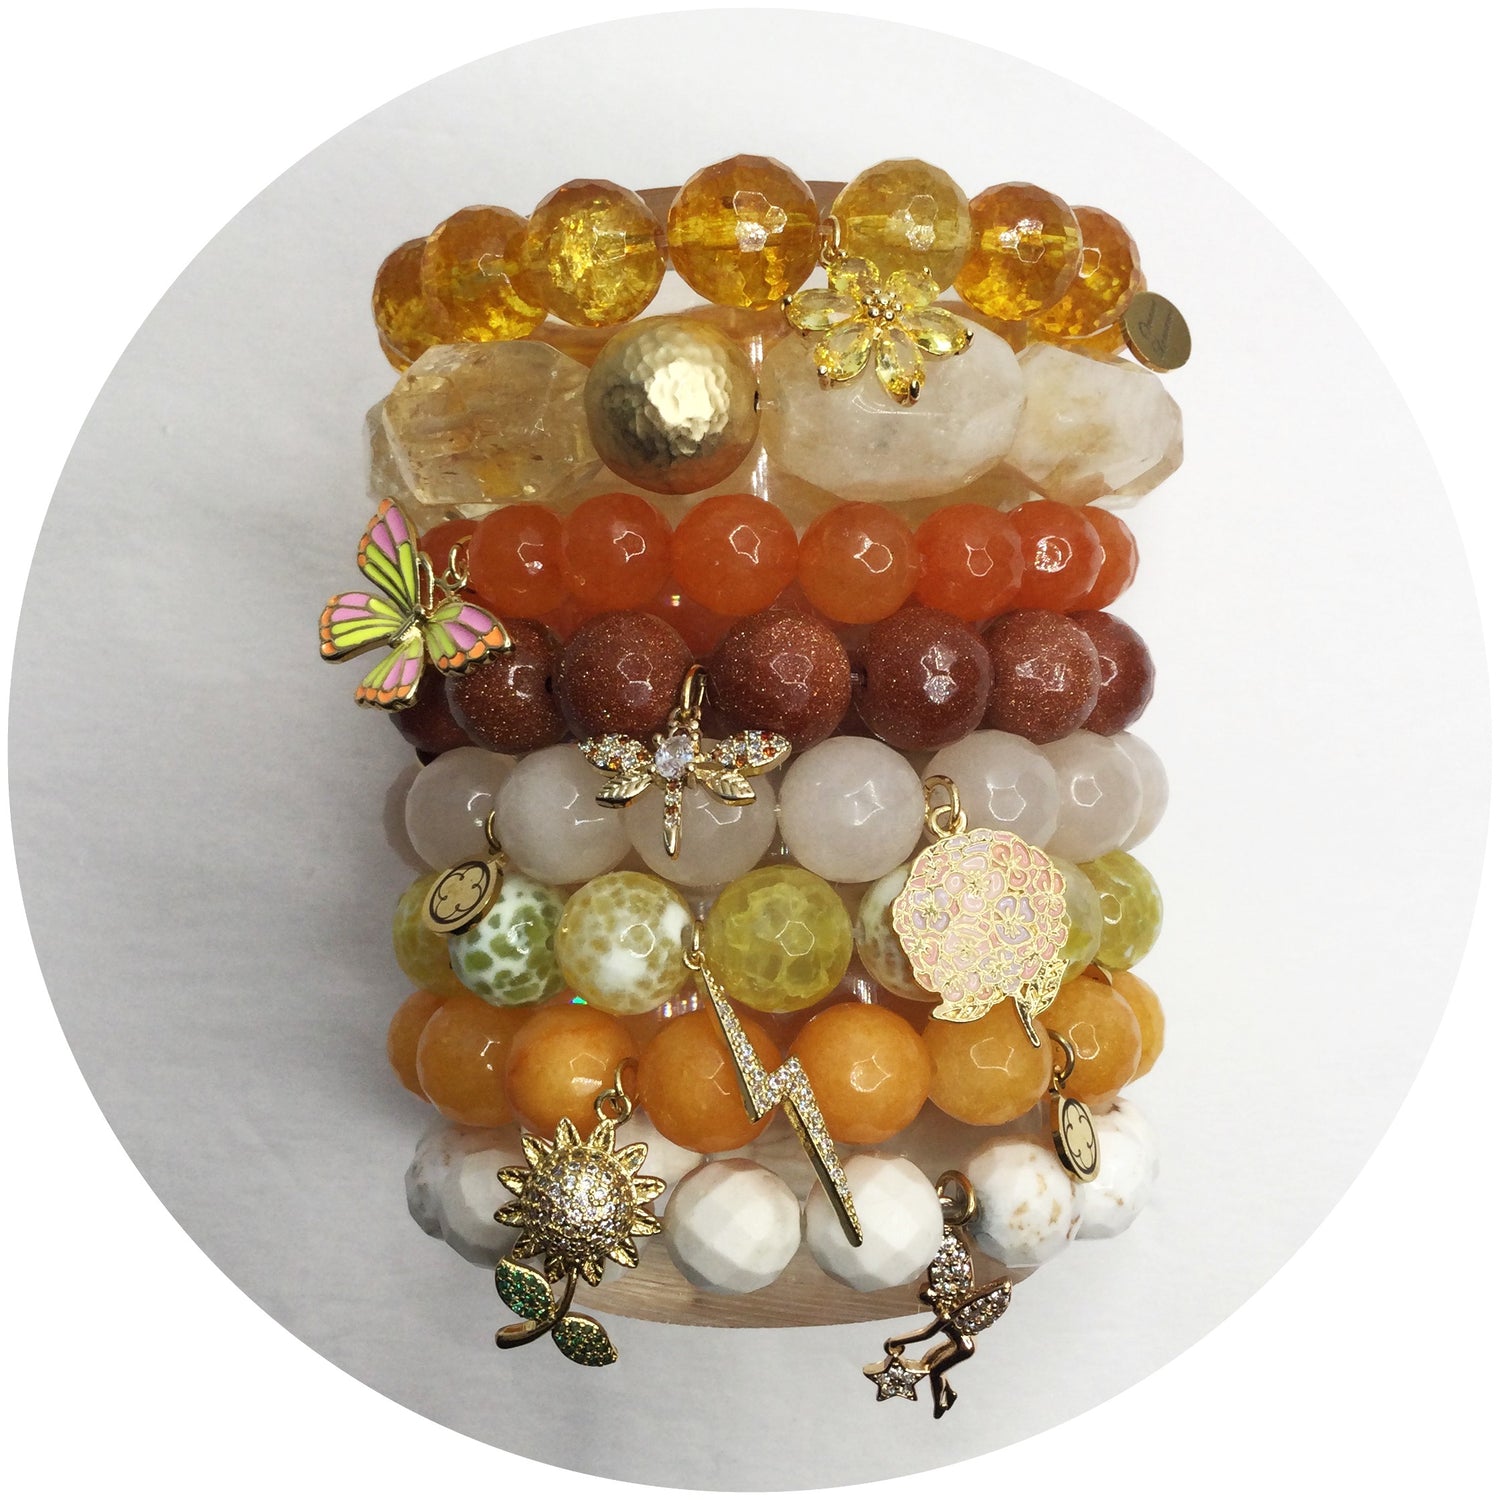 Build Me Up Buttercup Armparty